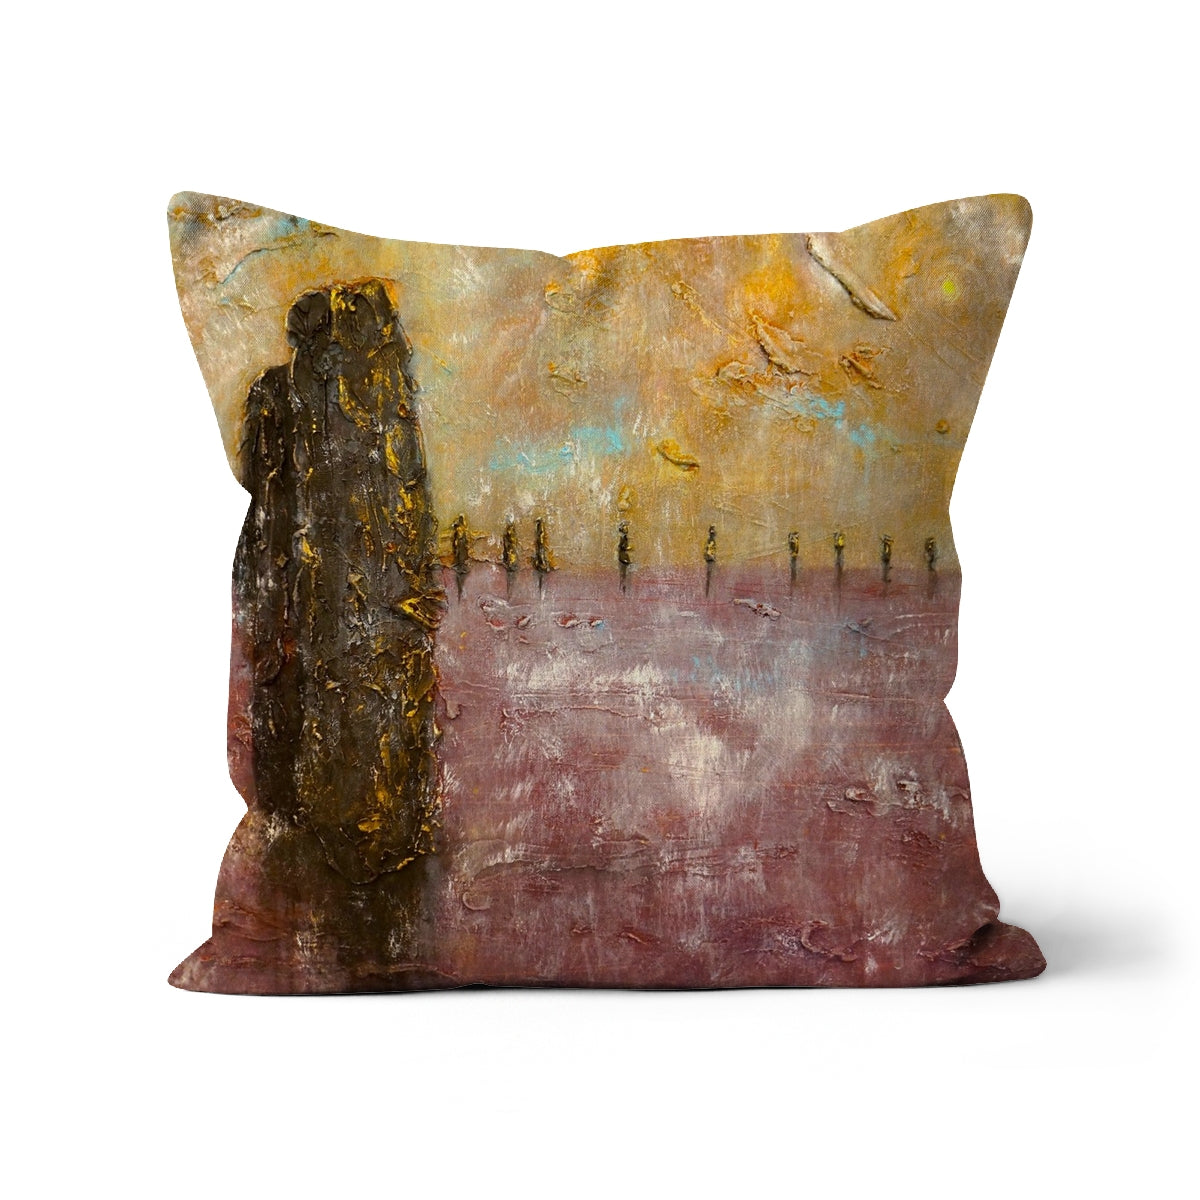 Brodgar Mist Orkney Art Gifts Cushion-Cushions-Orkney Art Gallery-Canvas-16"x16"-Paintings, Prints, Homeware, Art Gifts From Scotland By Scottish Artist Kevin Hunter